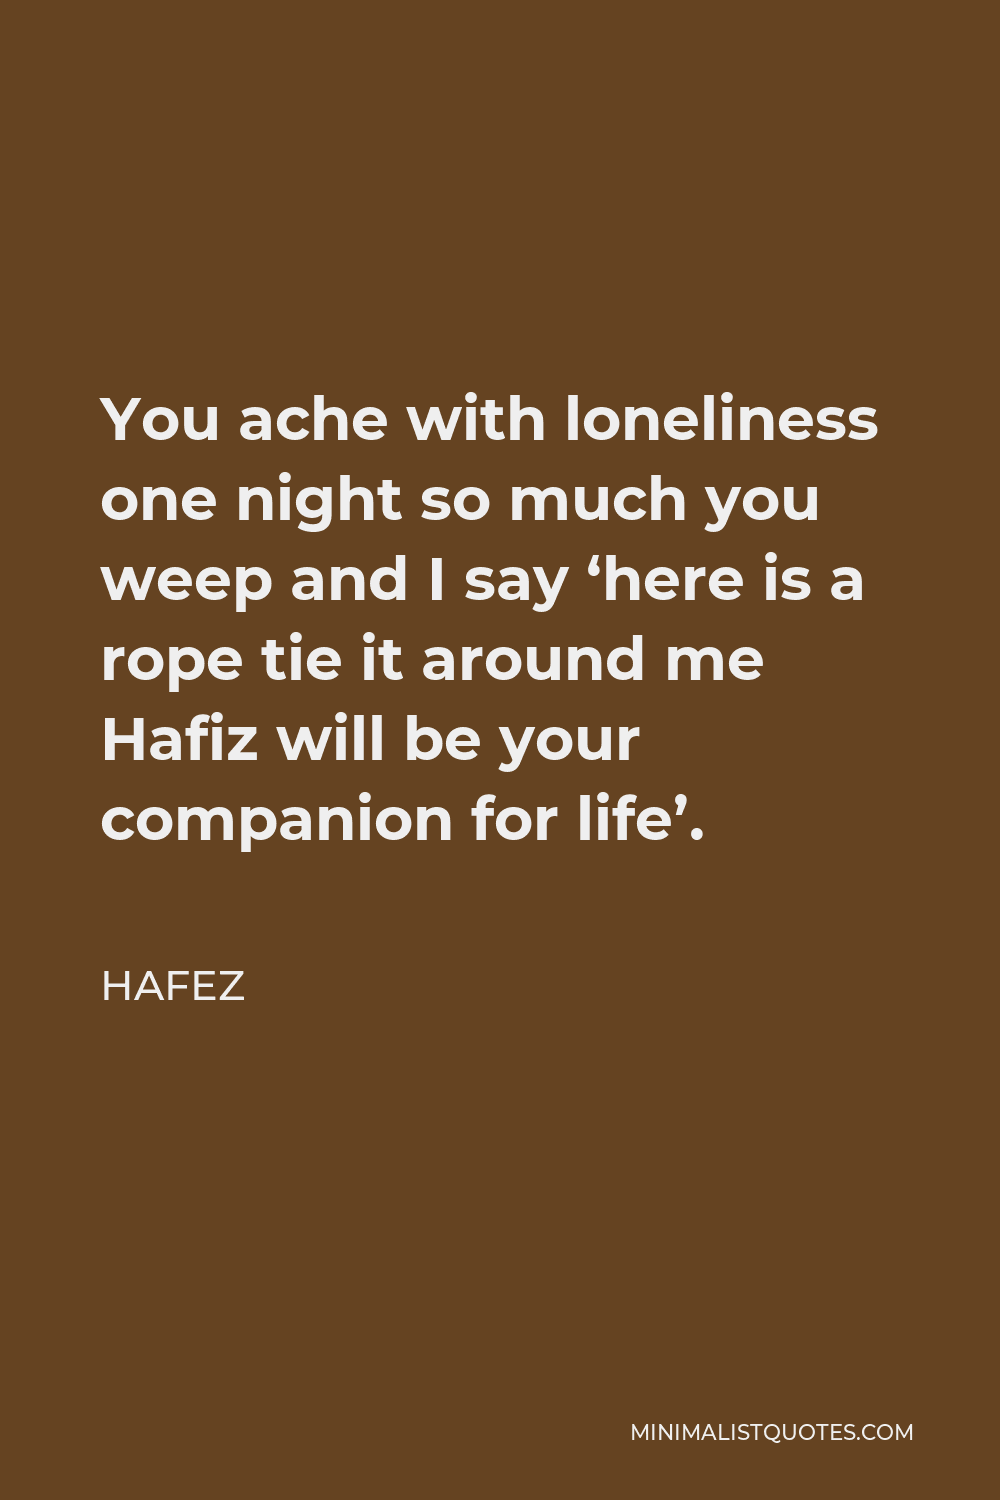 Hafez Quote - You ache with loneliness one night so much you weep and I say ‘here is a rope tie it around me Hafiz will be your companion for life’.